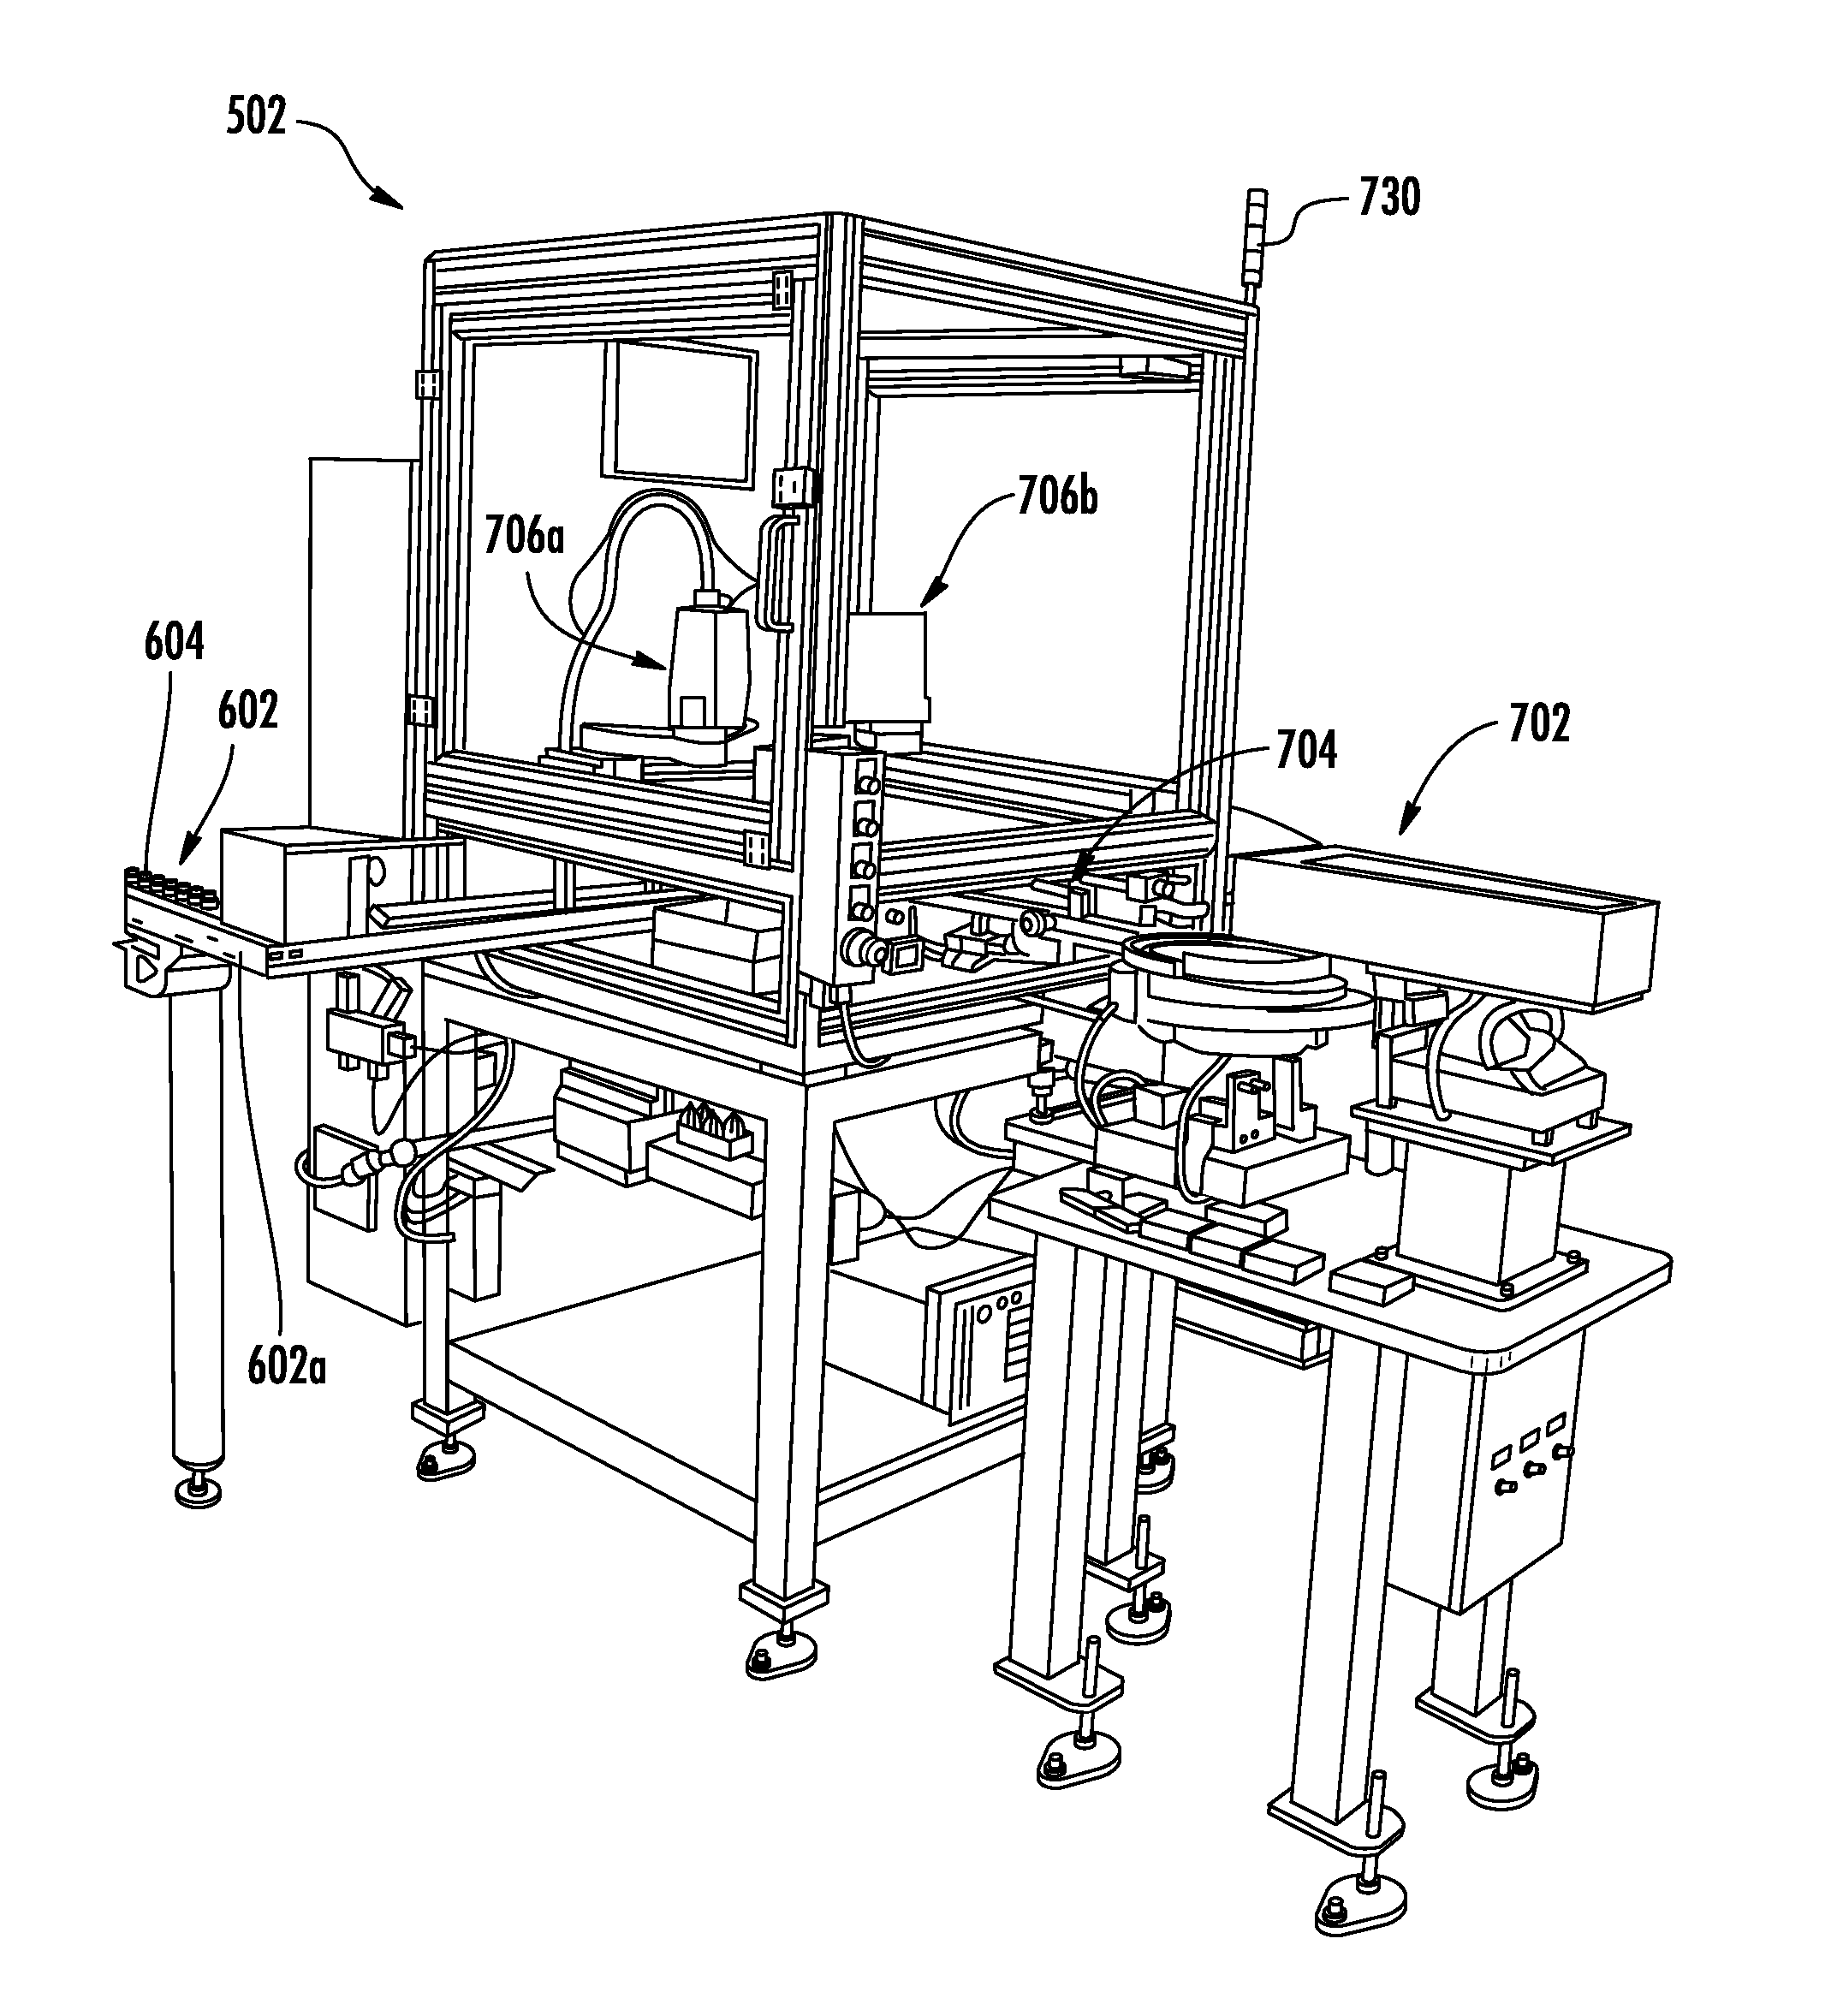 Method for Assembling a Cartridge for a Smoking Article, and Associated System and Apparatus